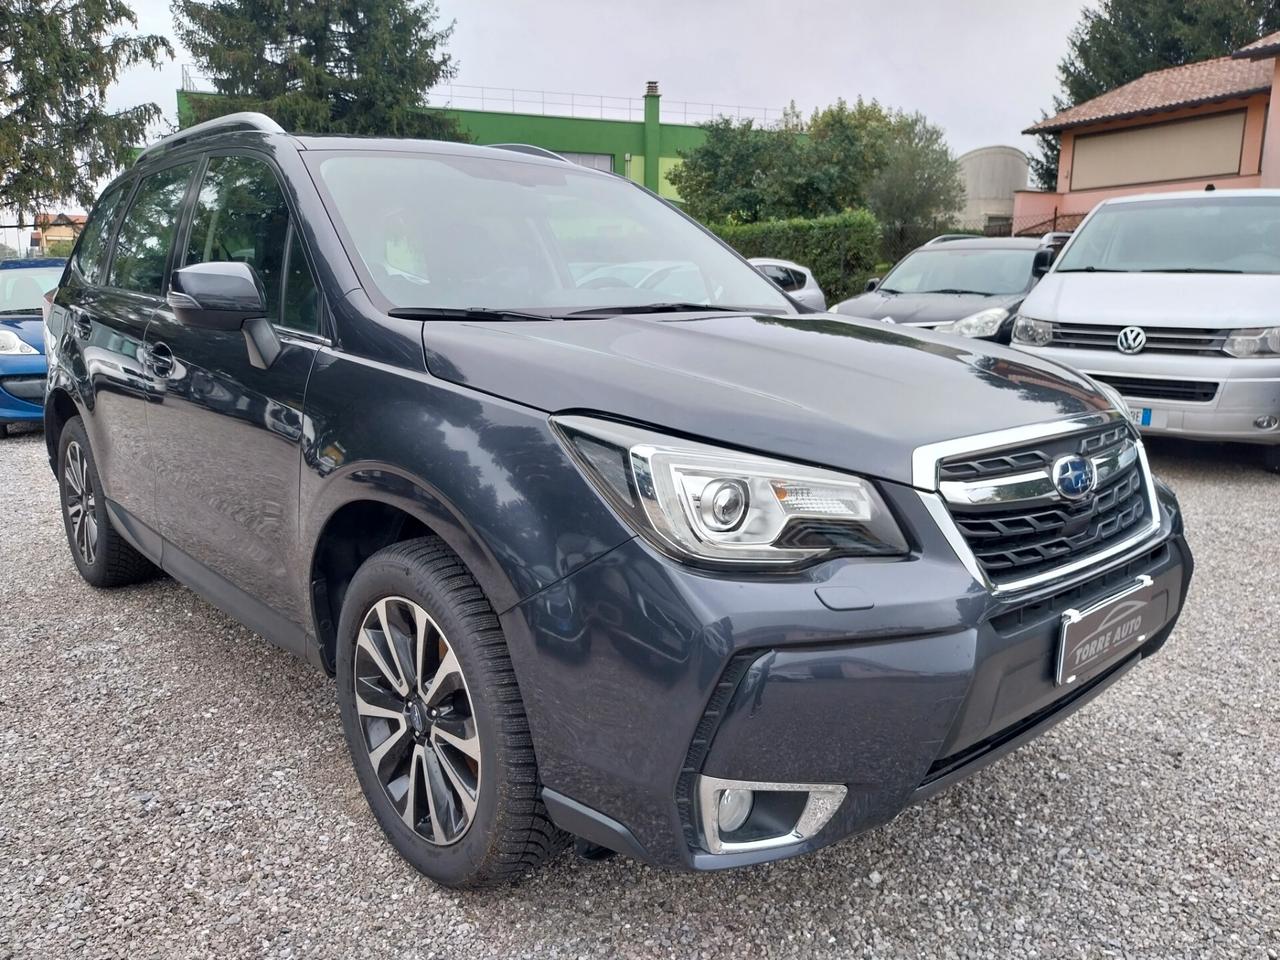 Subaru Forester Forester 2.0d-S Sport Style